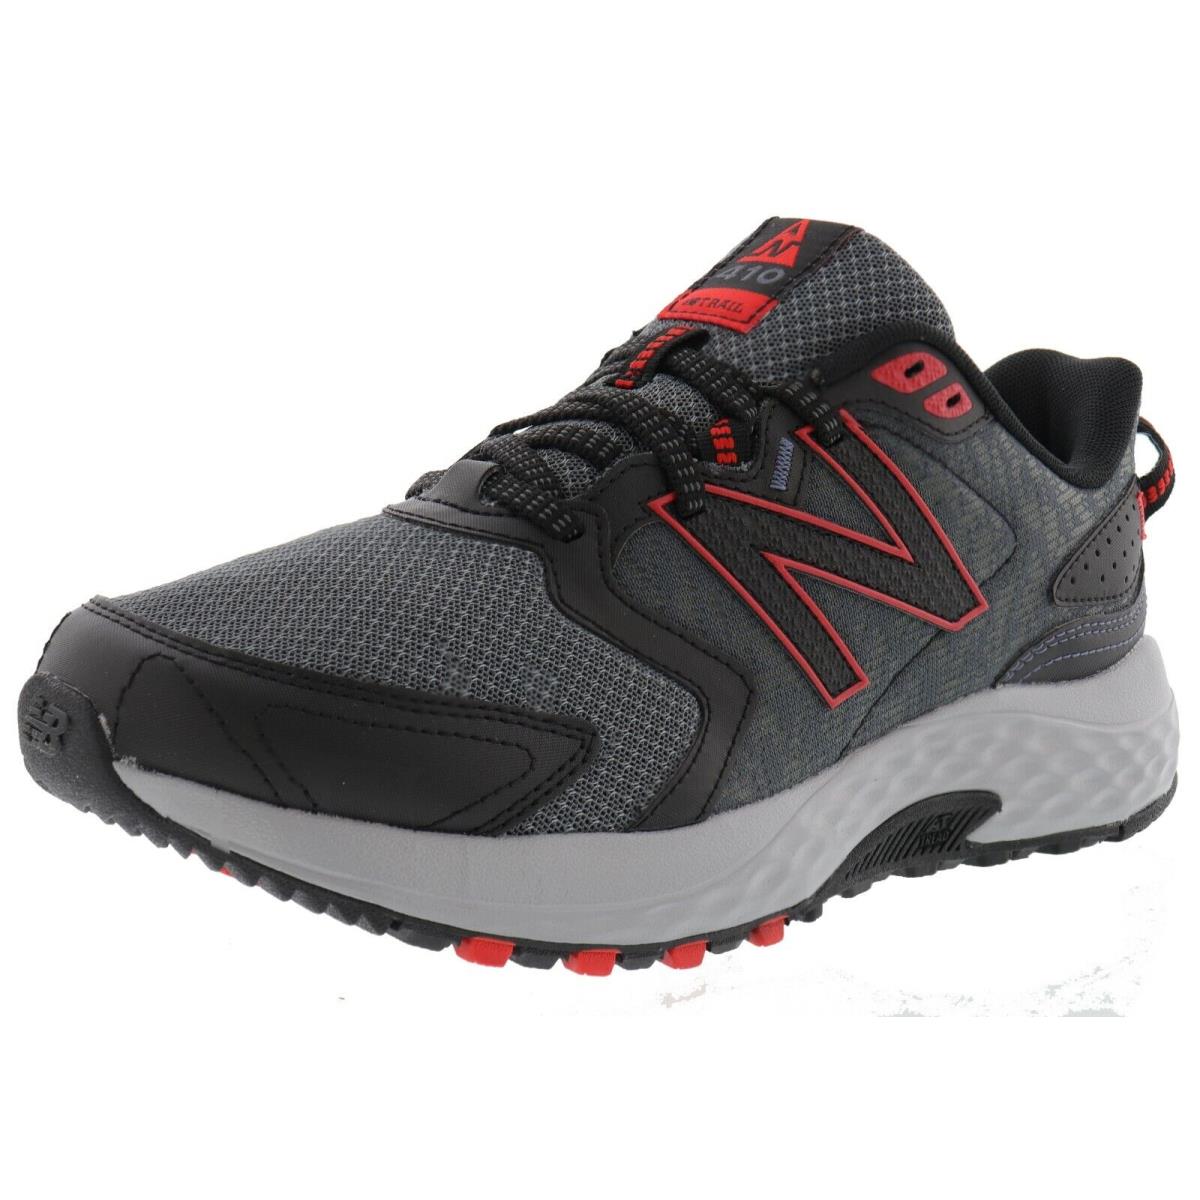 New Balance Men`s MT410 V7 4E Width All Terrain Trail Running Shoes LEAD / BLACK / RED / CYCLONE